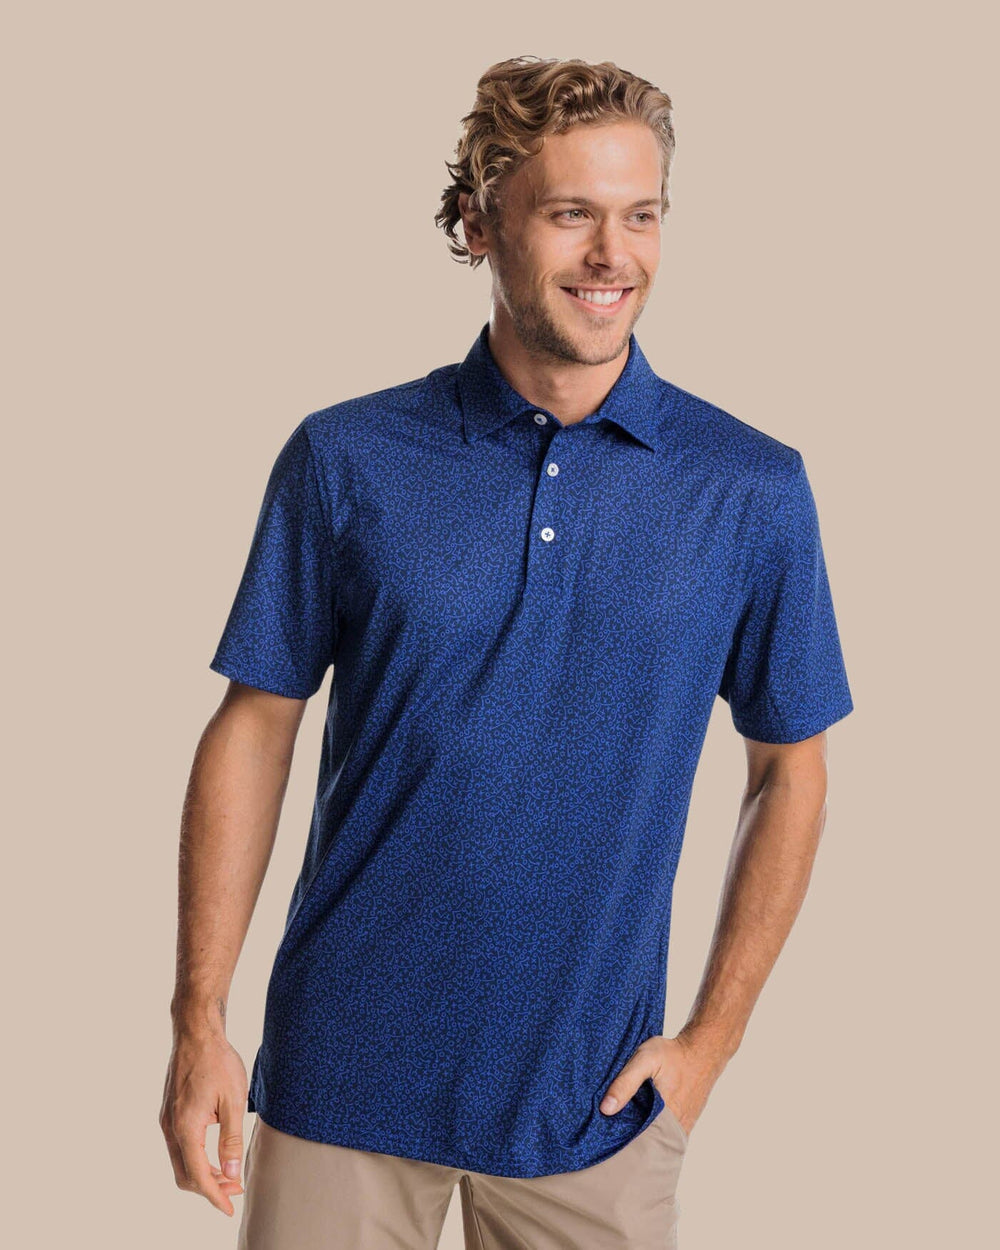 The front view of the Southern Tide Driver Gameplay Polo by Southern Tide - Navy